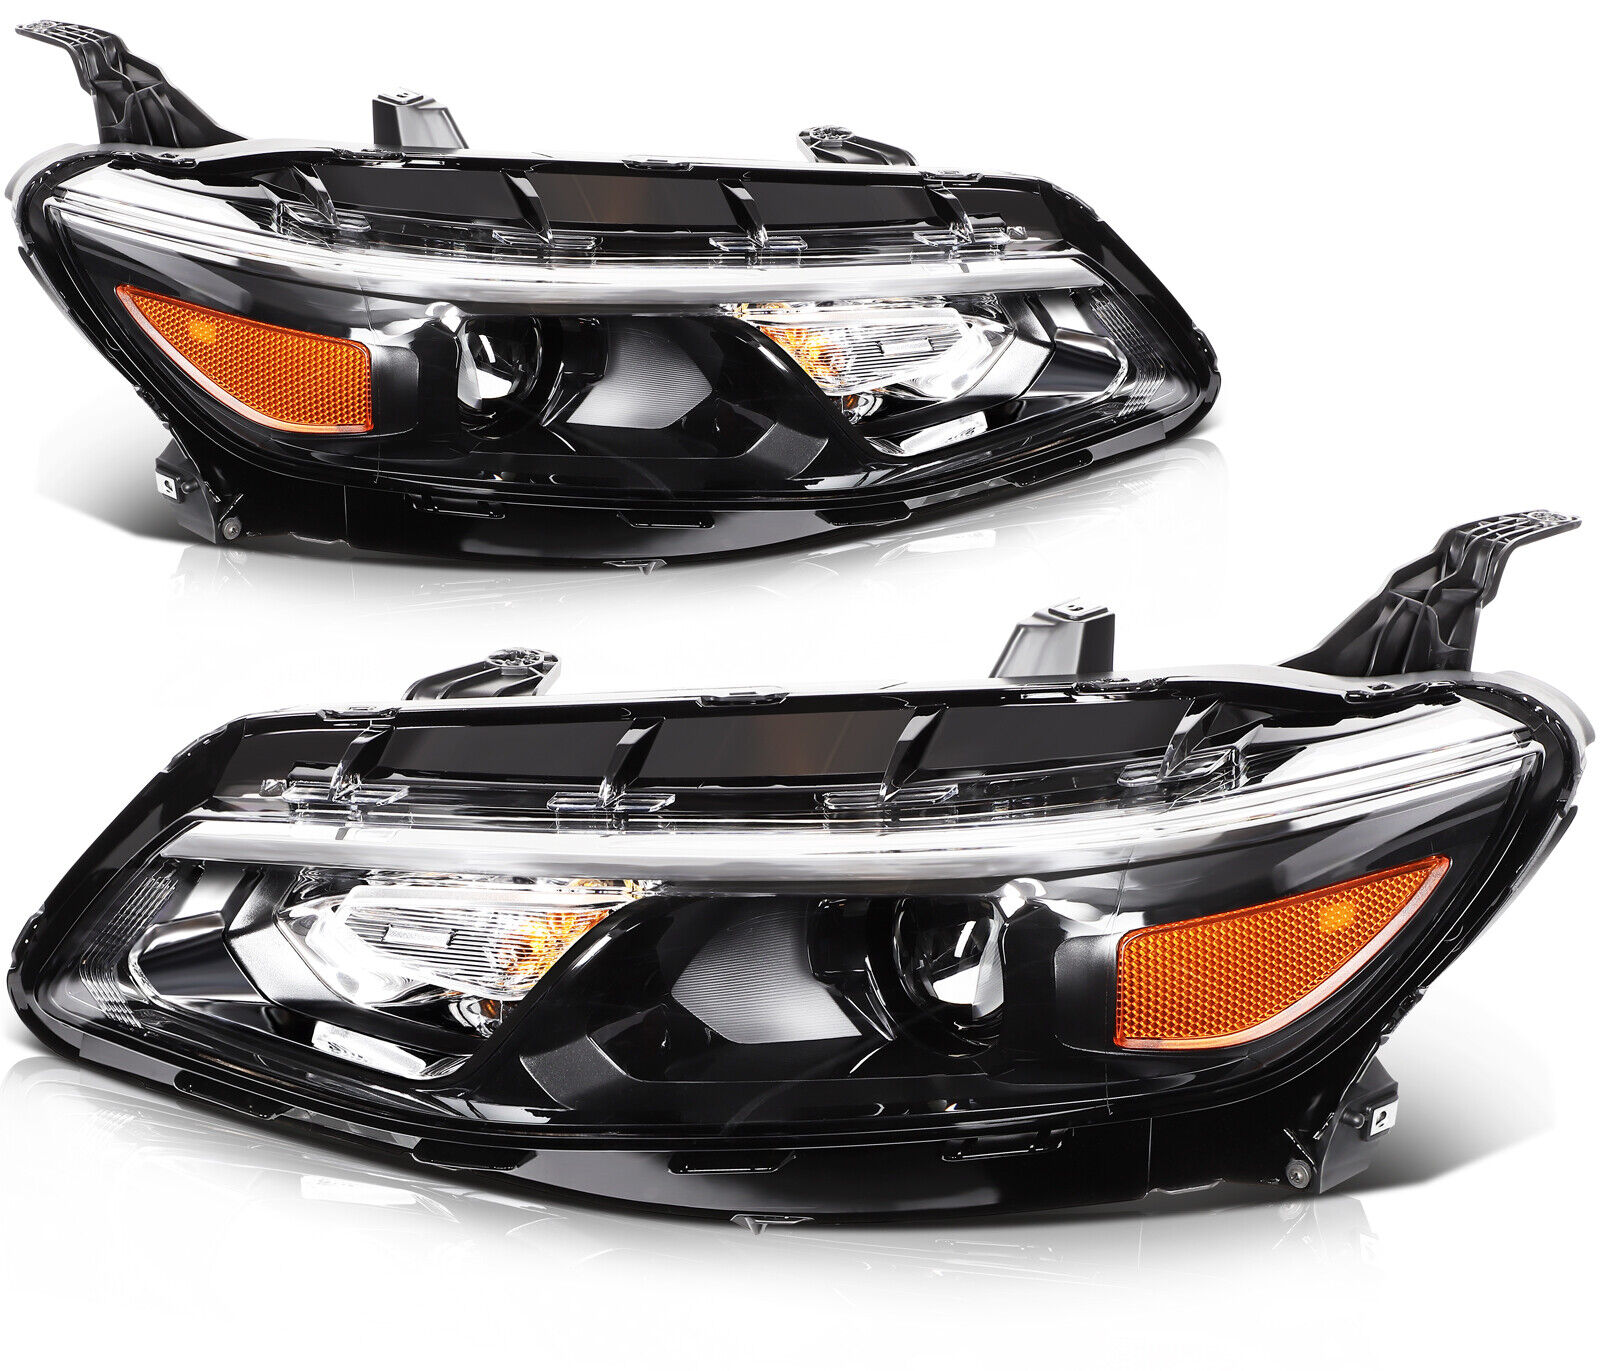 Headlight Assembly For 2016 2017 2018 Chevy Malibu Left+Right Pair Black Housing